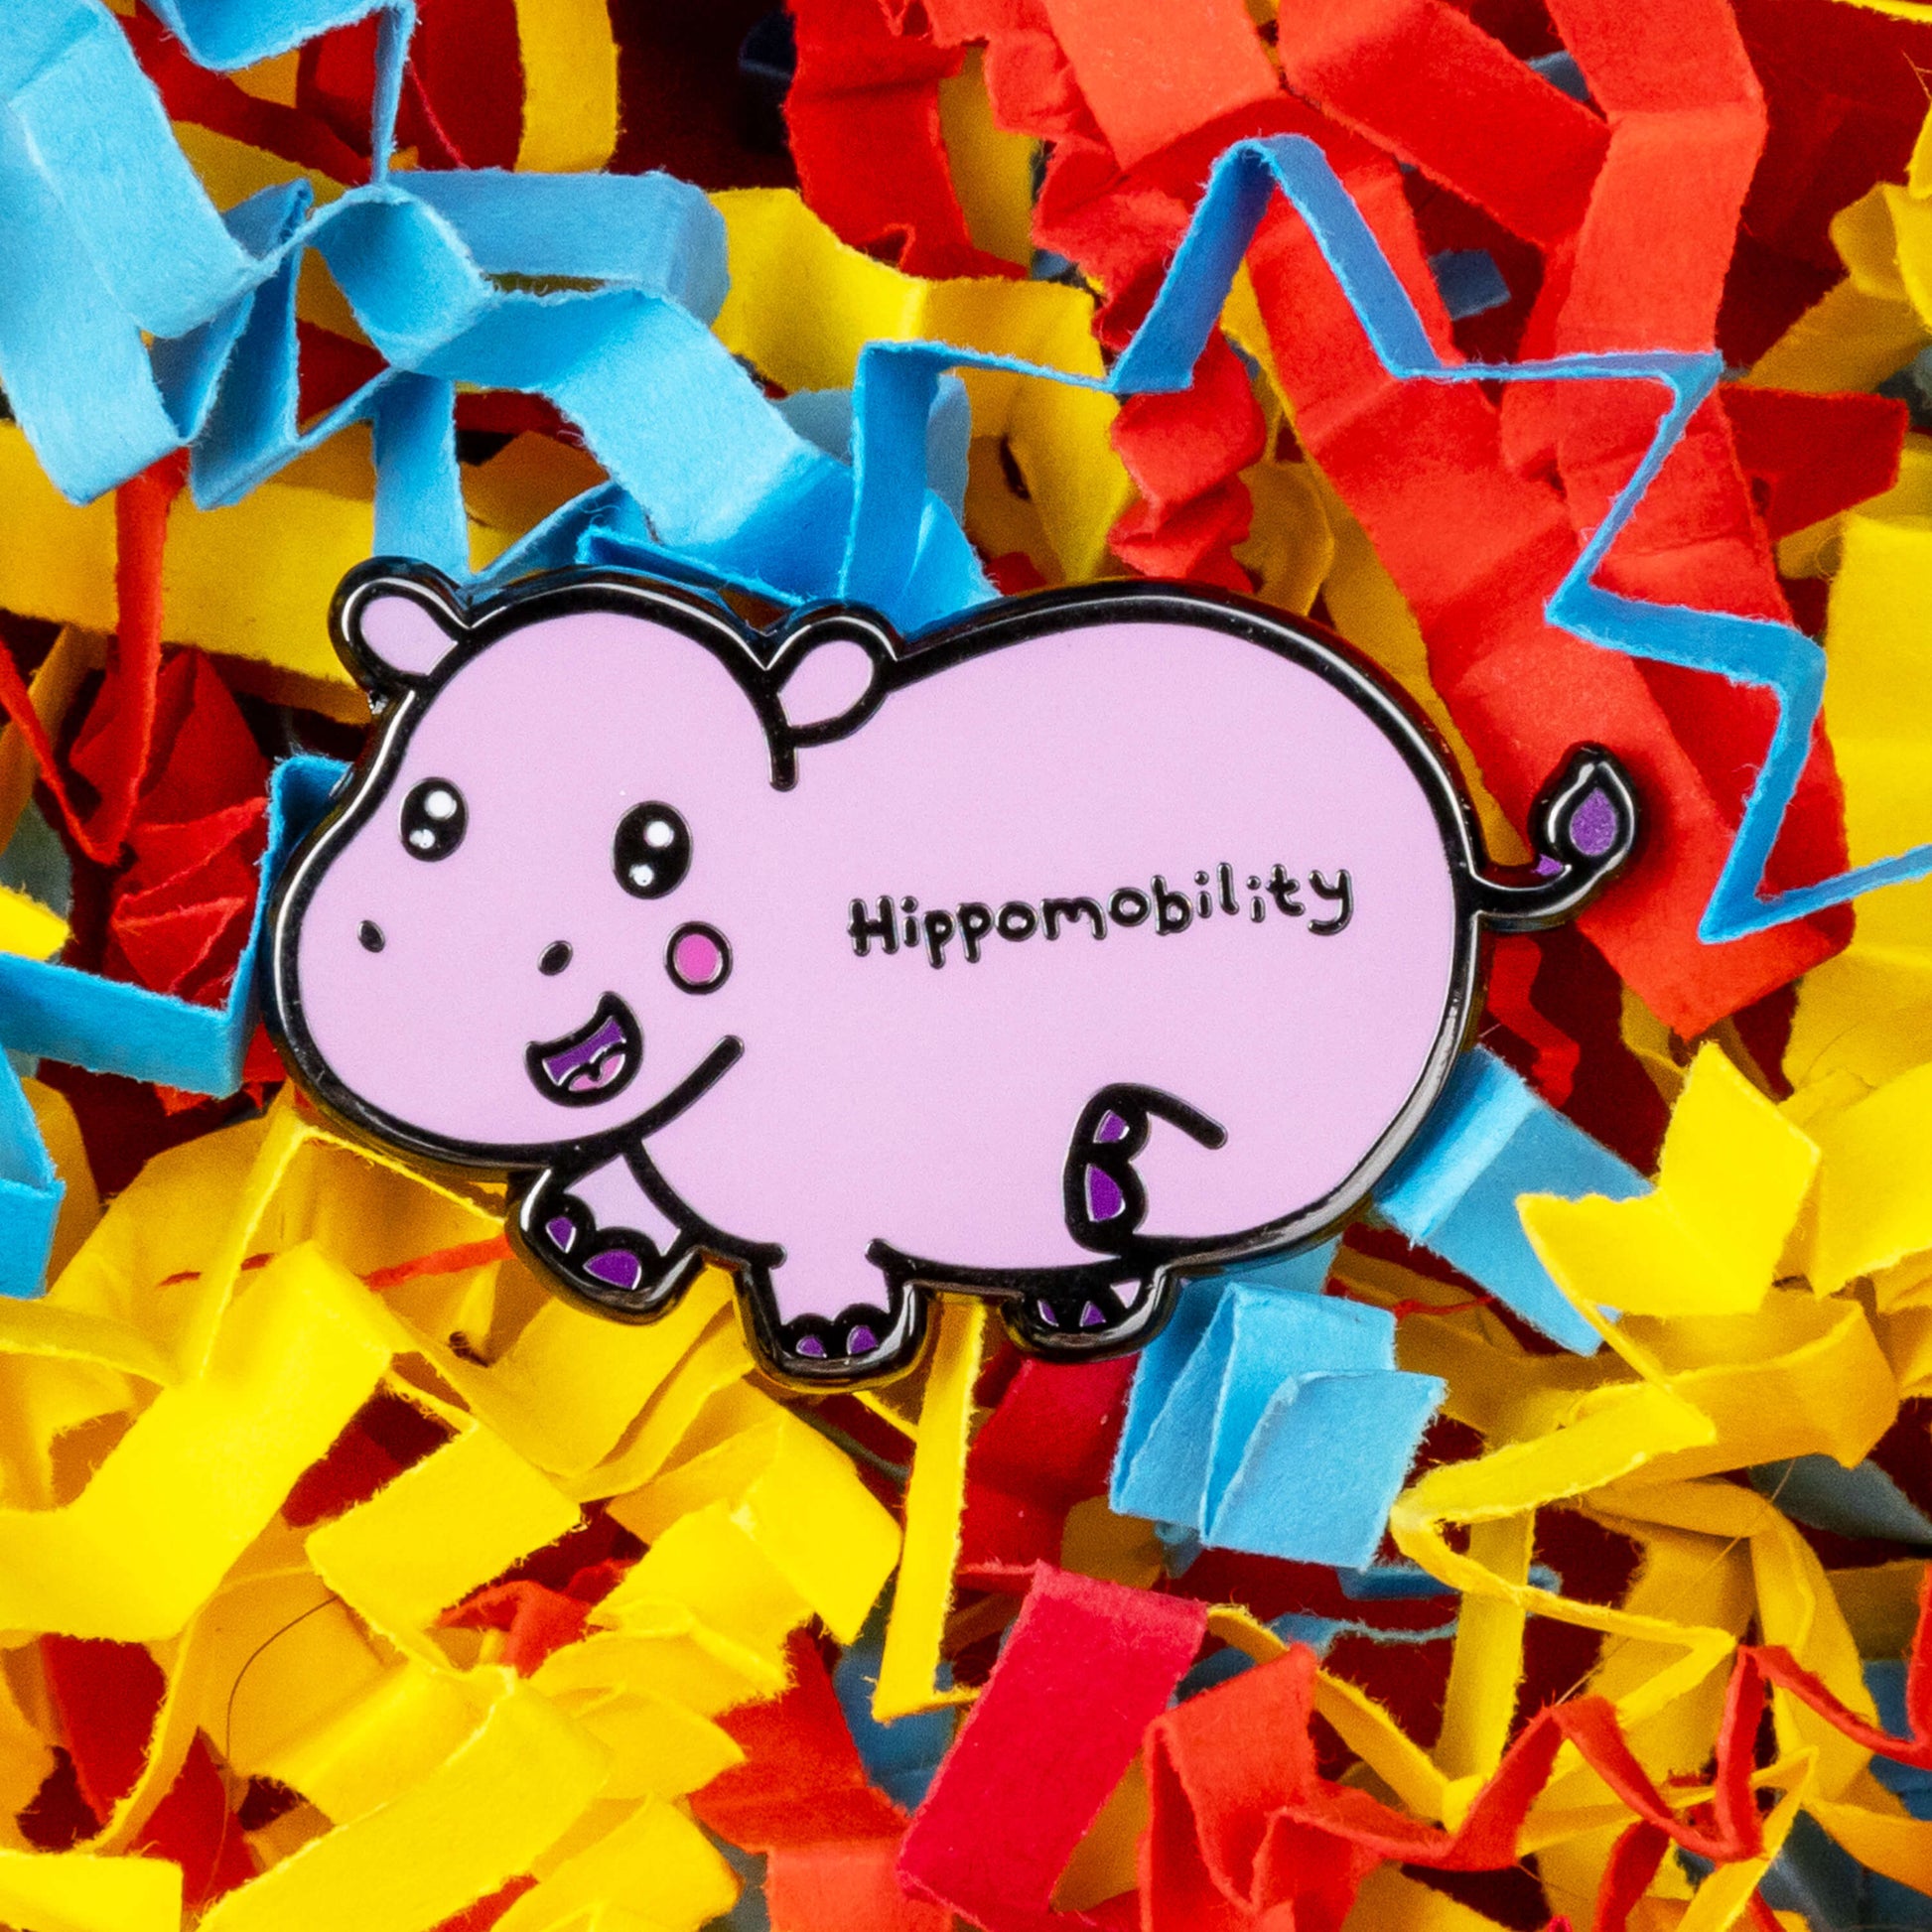 Hippmobility Enamel Pin - Hyper Mobility shown on a red, blue and yellow card confetti background. The enamel pin is of a pink happy hippo with the text hippomobility written on its stomach. The enamel pin is designed to raise awareness for hyper mobility